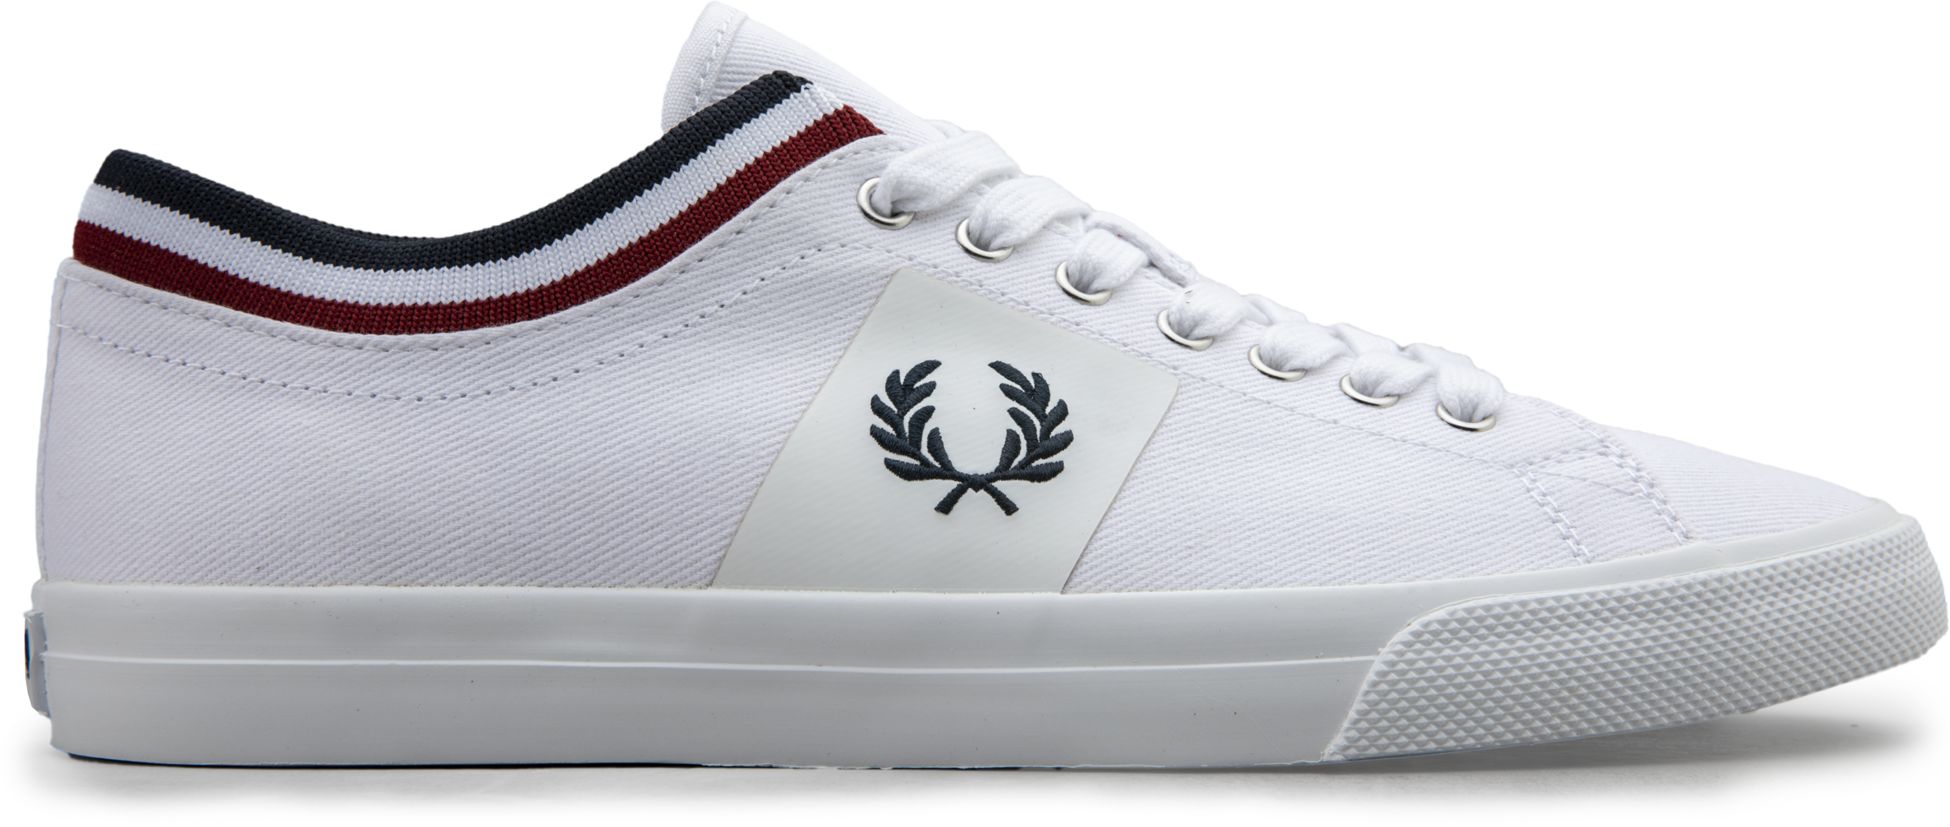 FRED PERRY M UNDERSPIN TIPPED CUFF TWILL på stadium.se